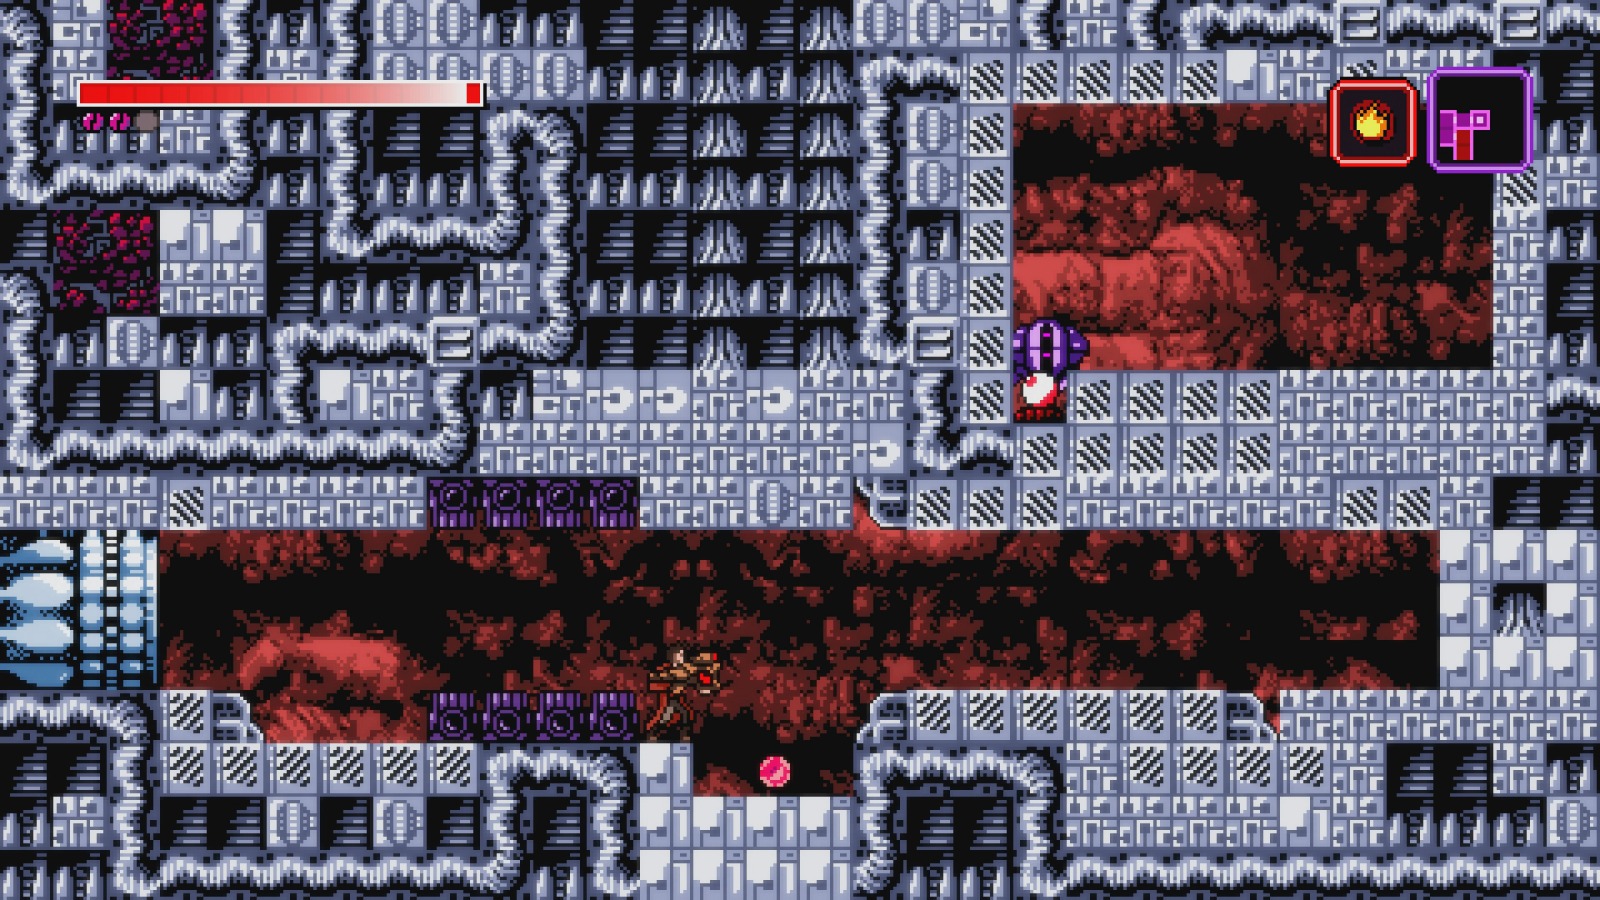 axiom verge 2 where to go after drone